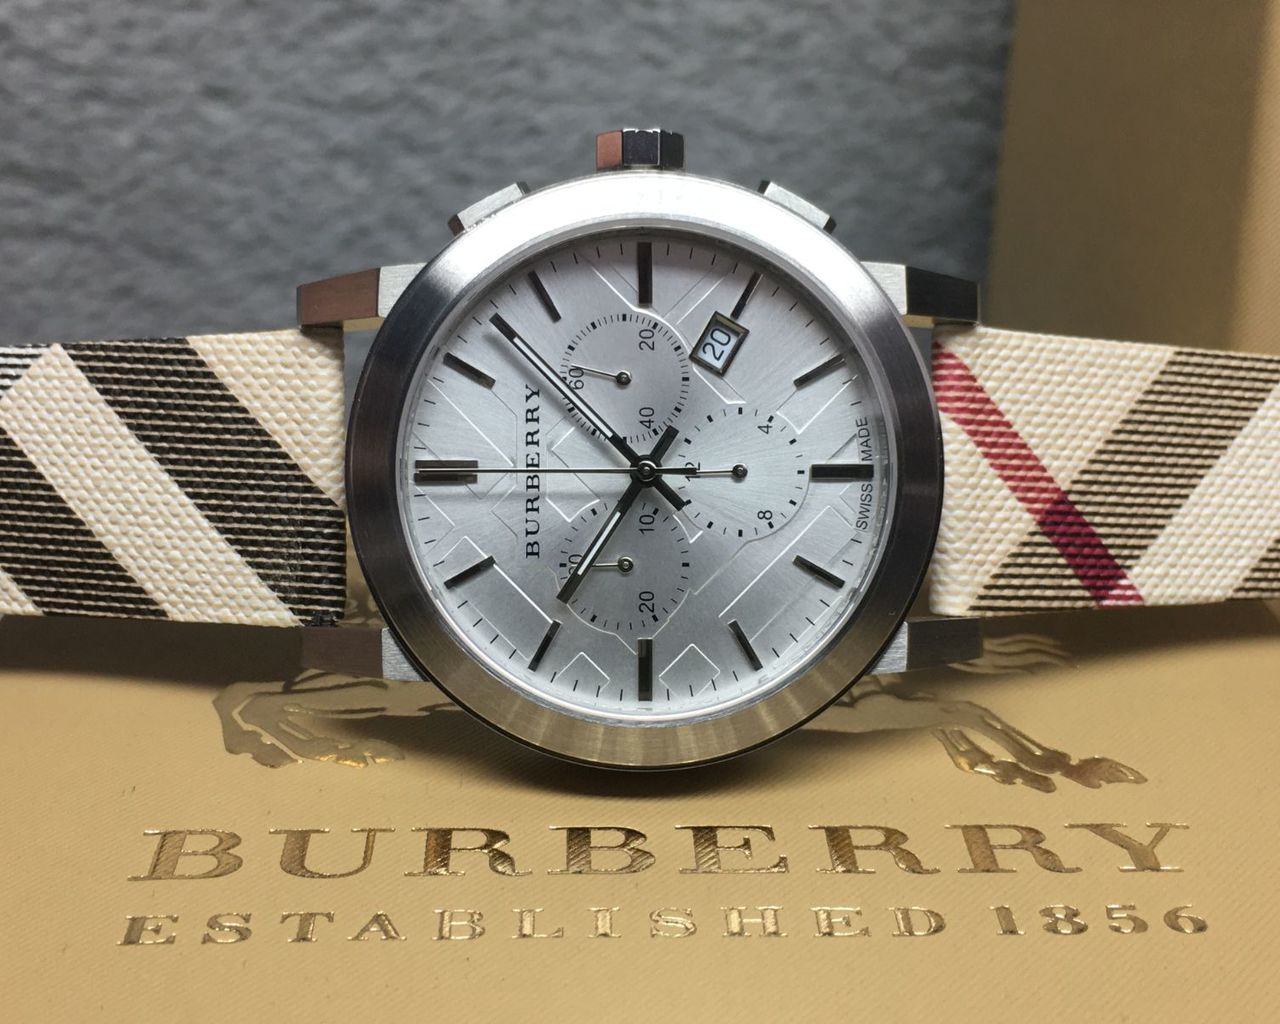 Burberry The City Nova White Dial Beige Leather Strap Watch for Men - BU9357